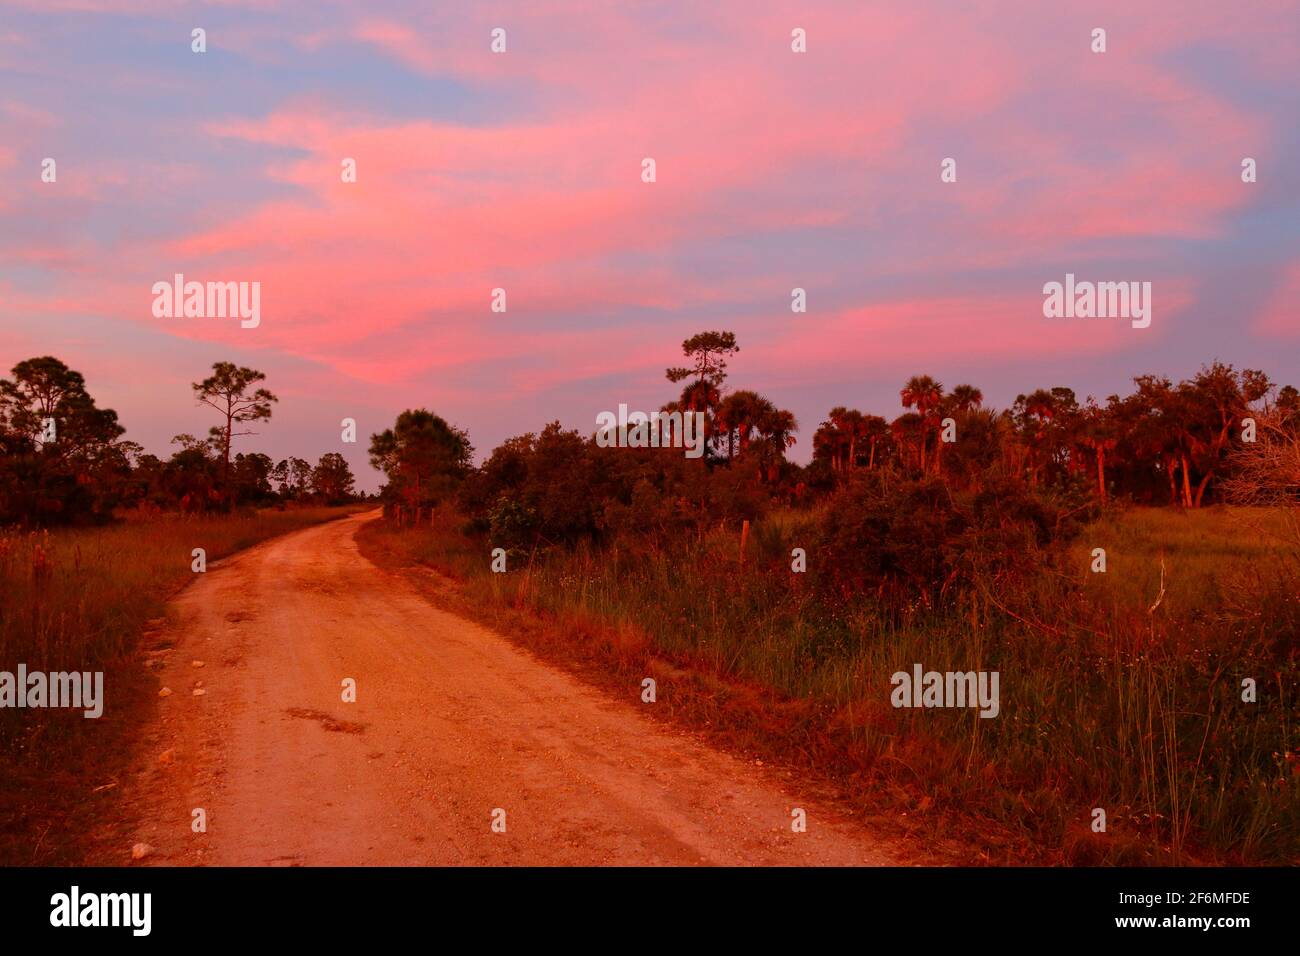 A scenic sunset at an everglades wildlife drive. Stock Photo